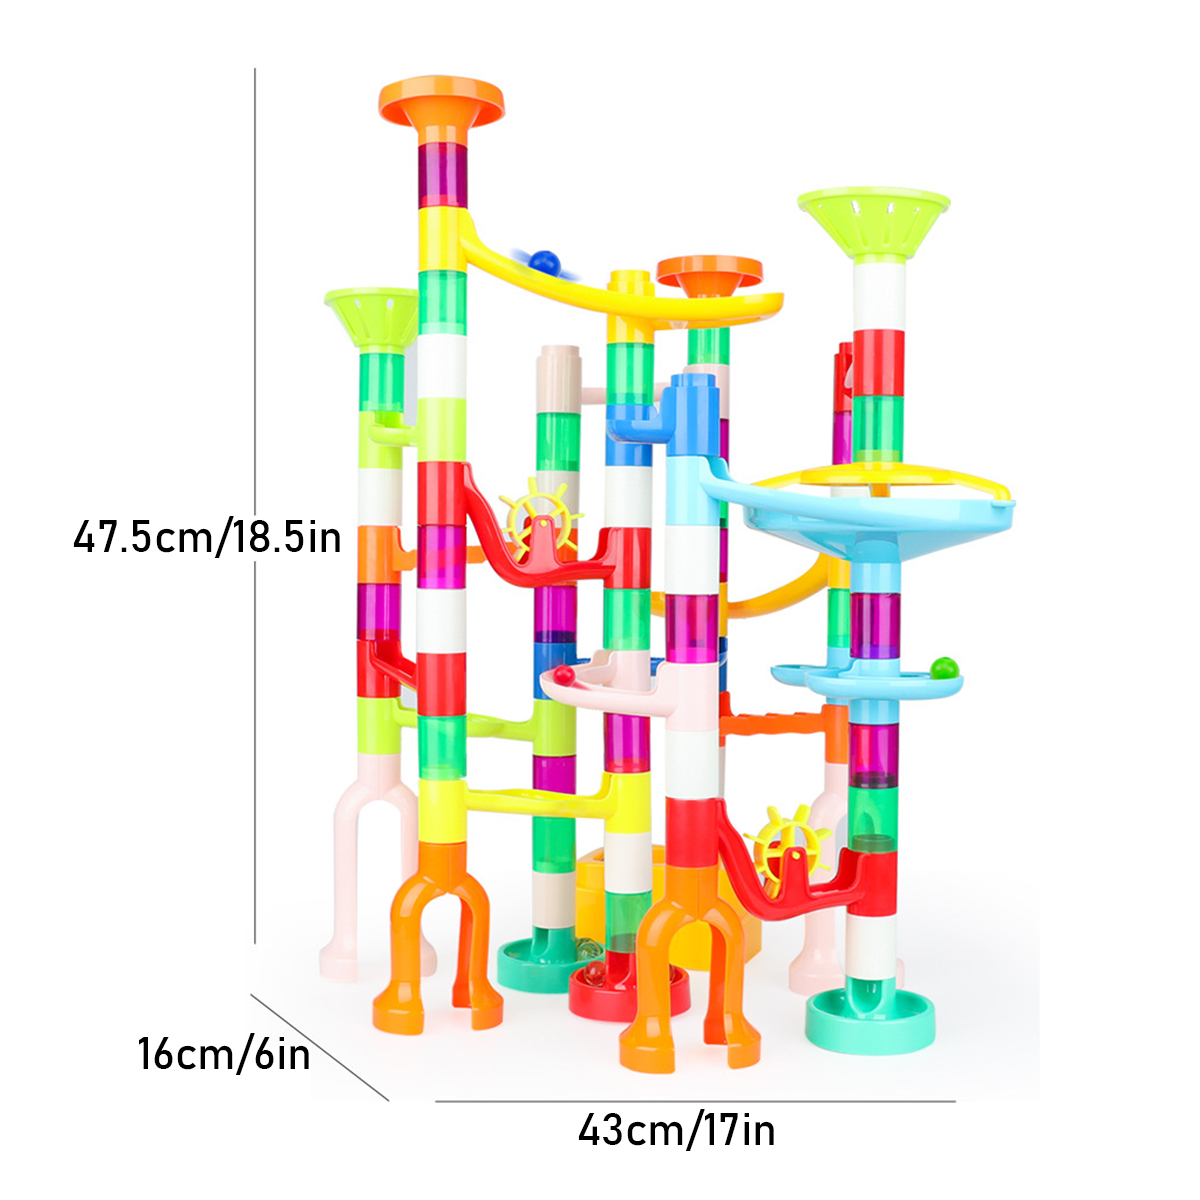 105-Pcs-Colorful-Transparent-Plastic-Creative-Marble-Run-Coasters-DIY-Assembly-Track-Blocks-Toy-for--1811469-11